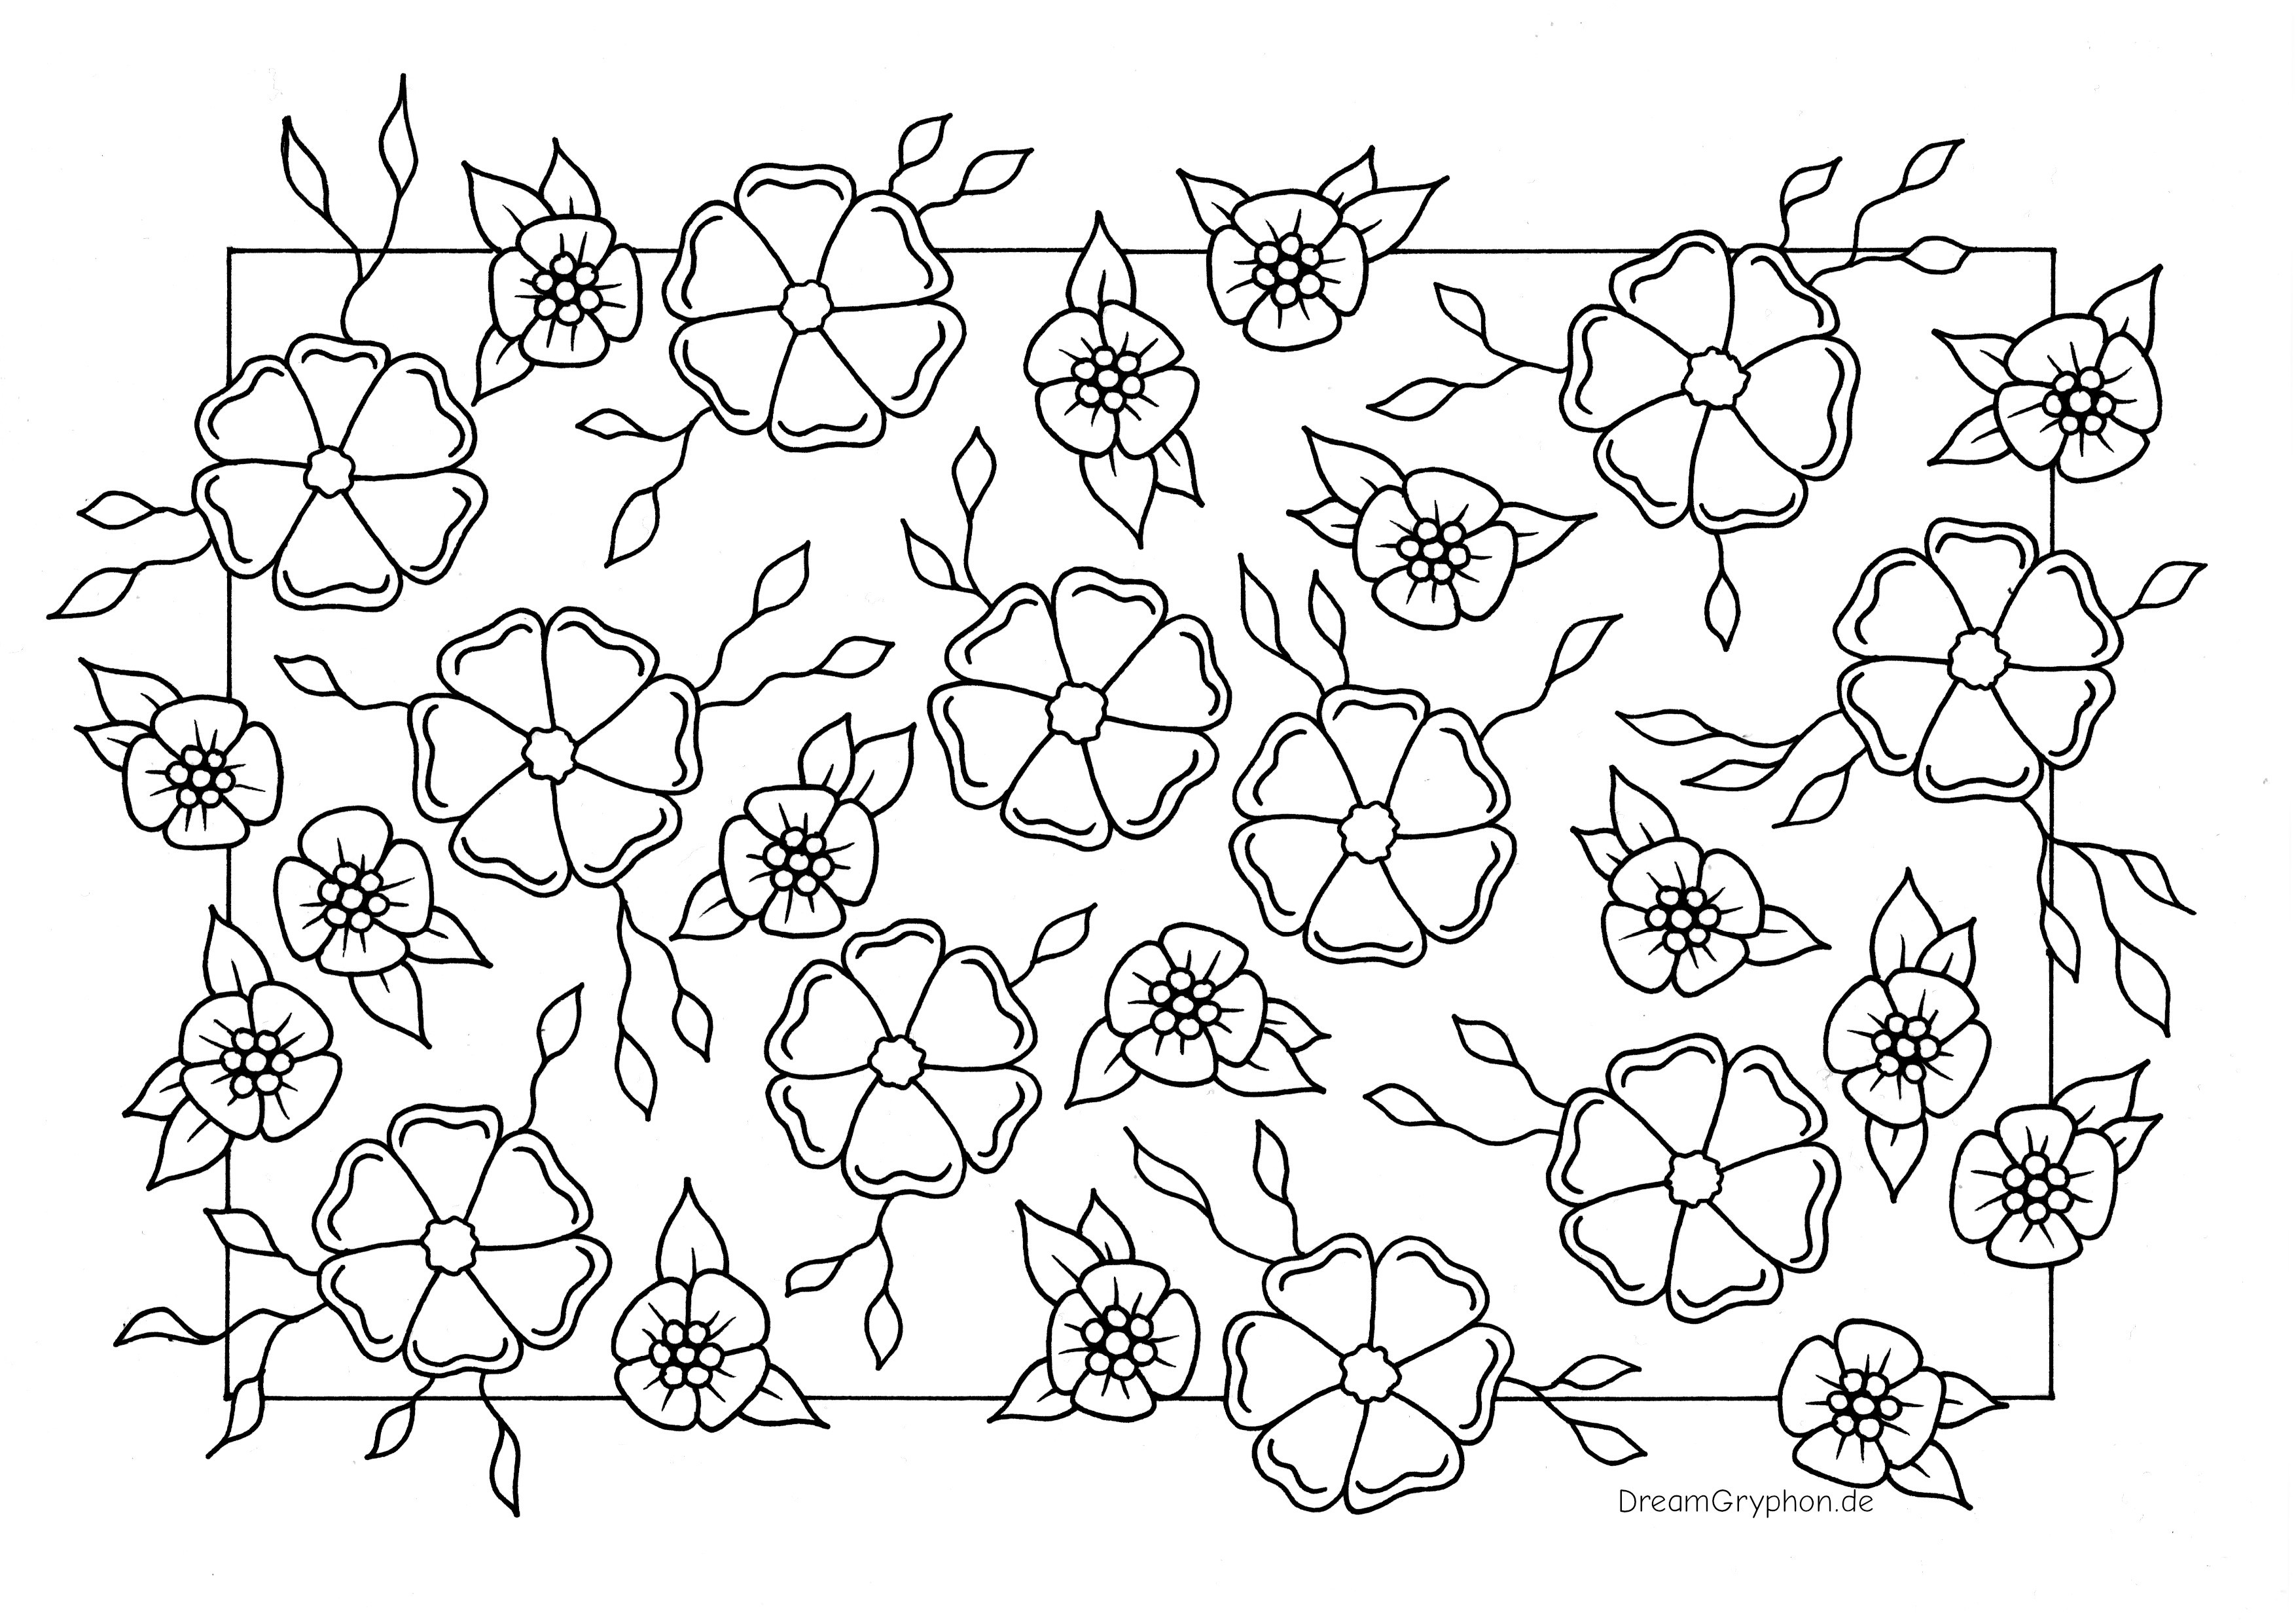 Coloring Page: Alot of blossoms